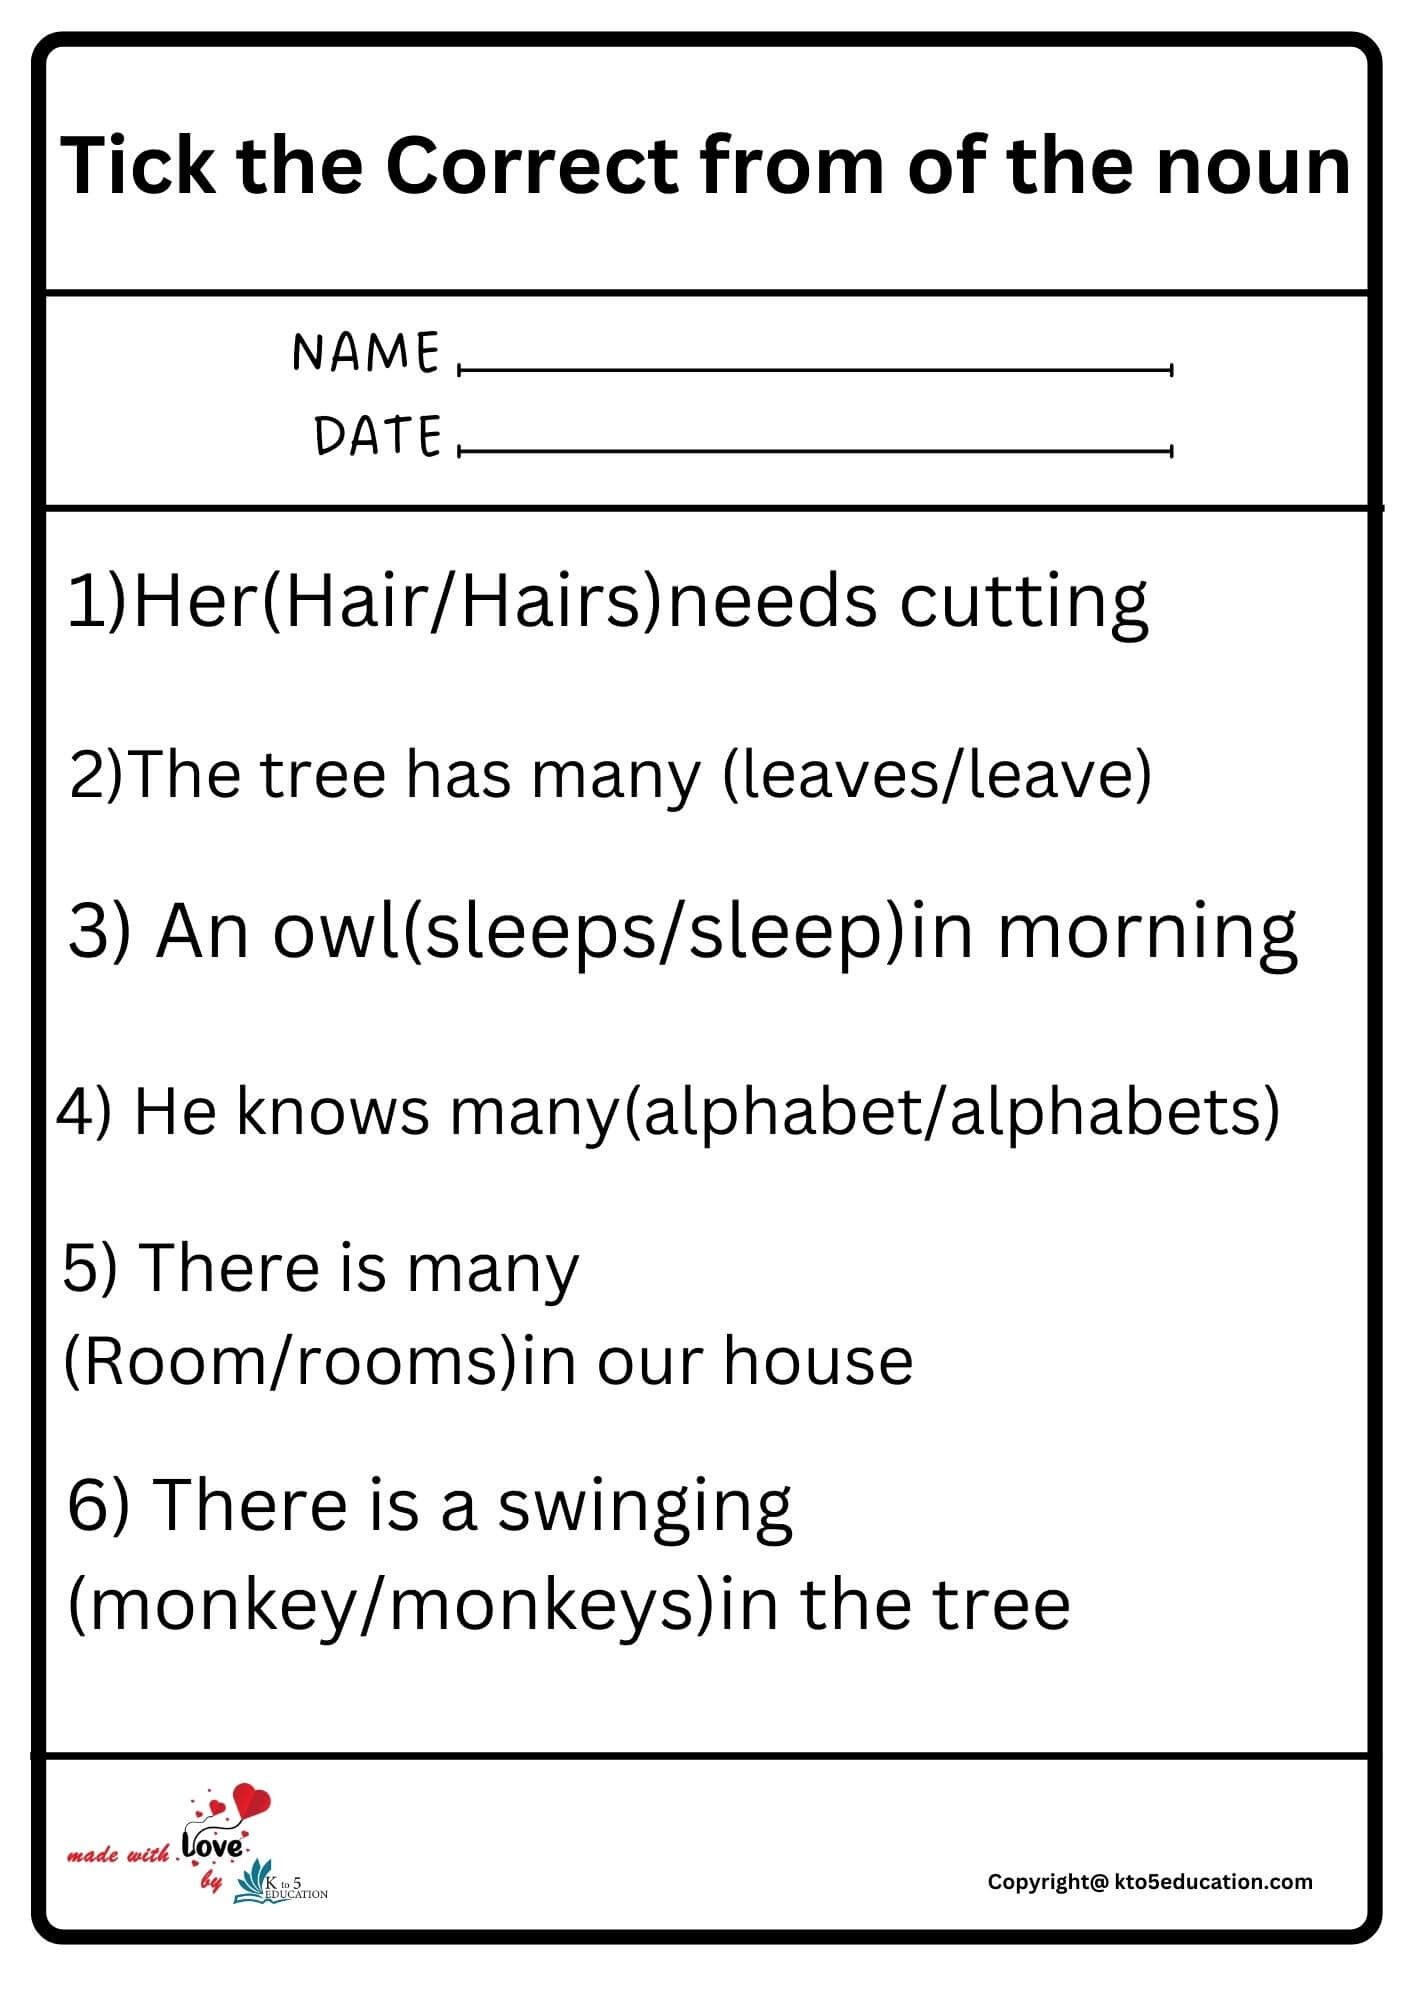 Tick The Correct From Of The Noun Worksheet